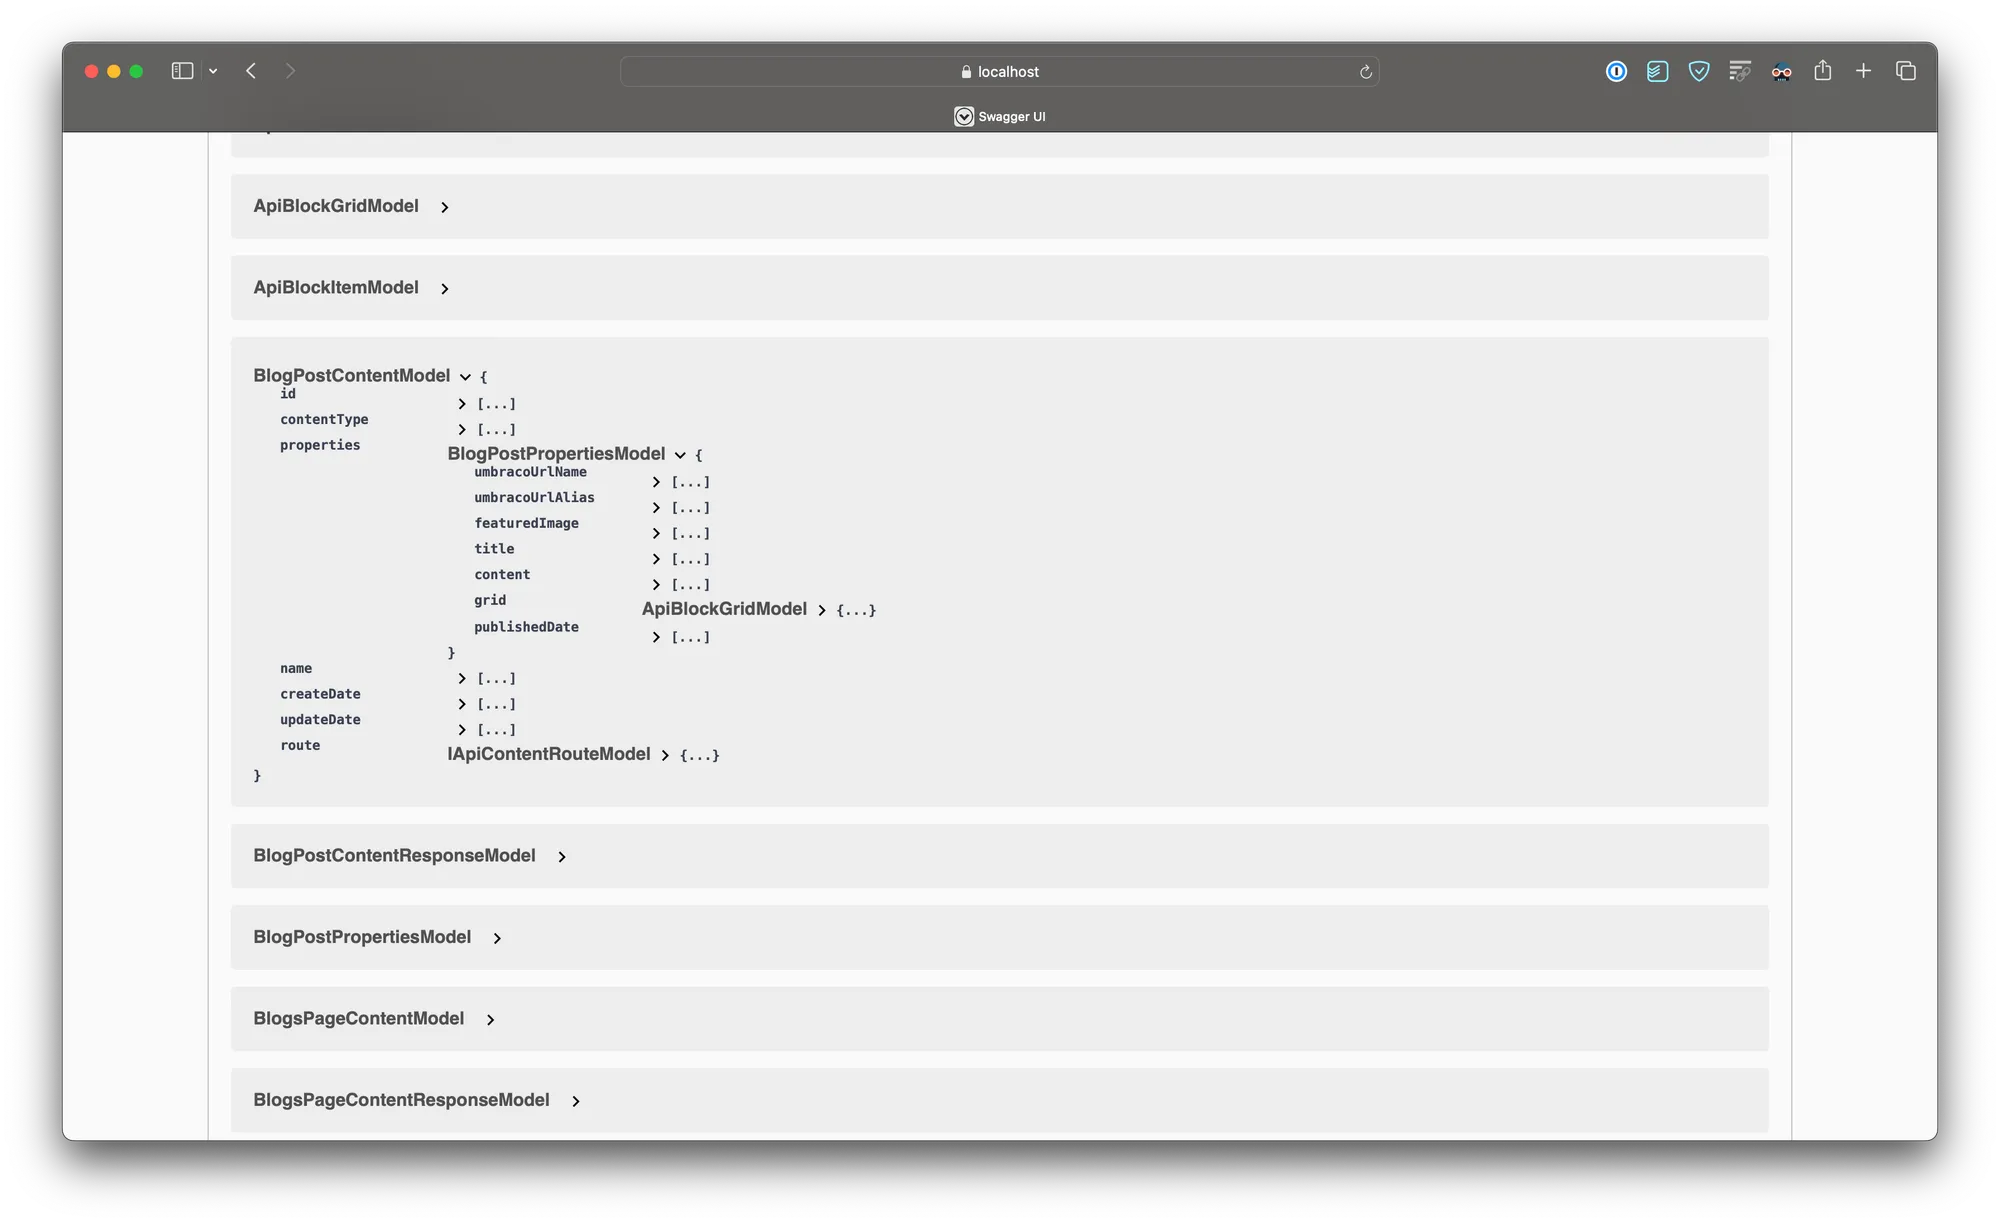 A screenshot of Umbraco's Swagger UI, showing expanded properties for BlogPostContentModel